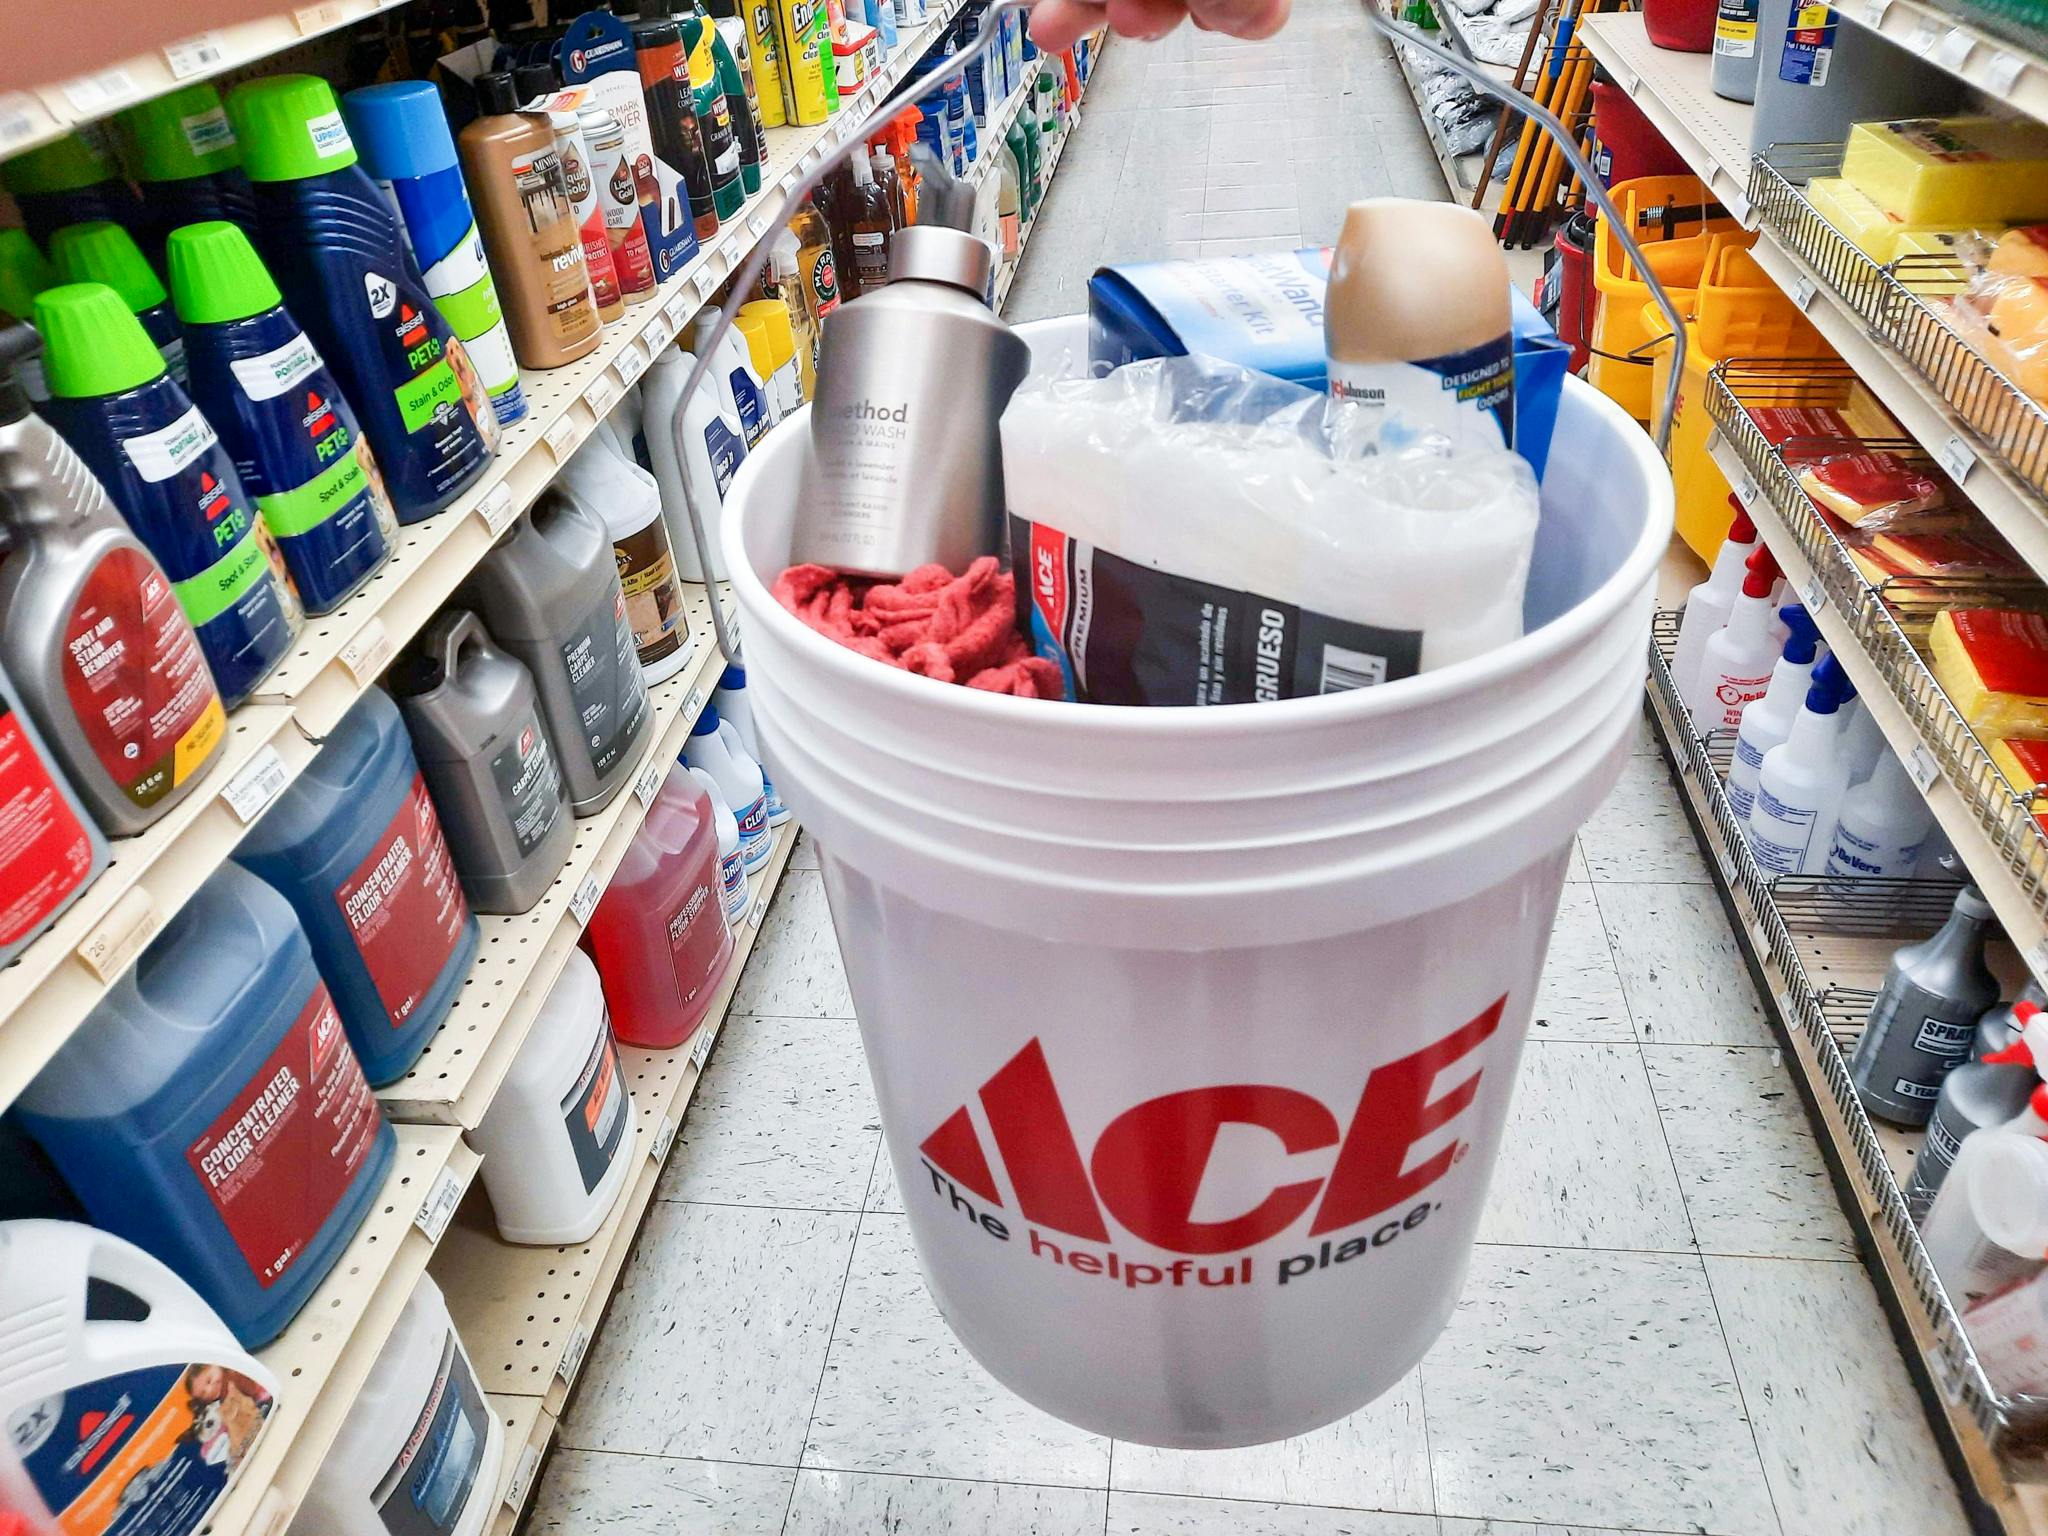 5-gallon Ace Hardware bucket filled with Glade, Method, and Ace brand products.